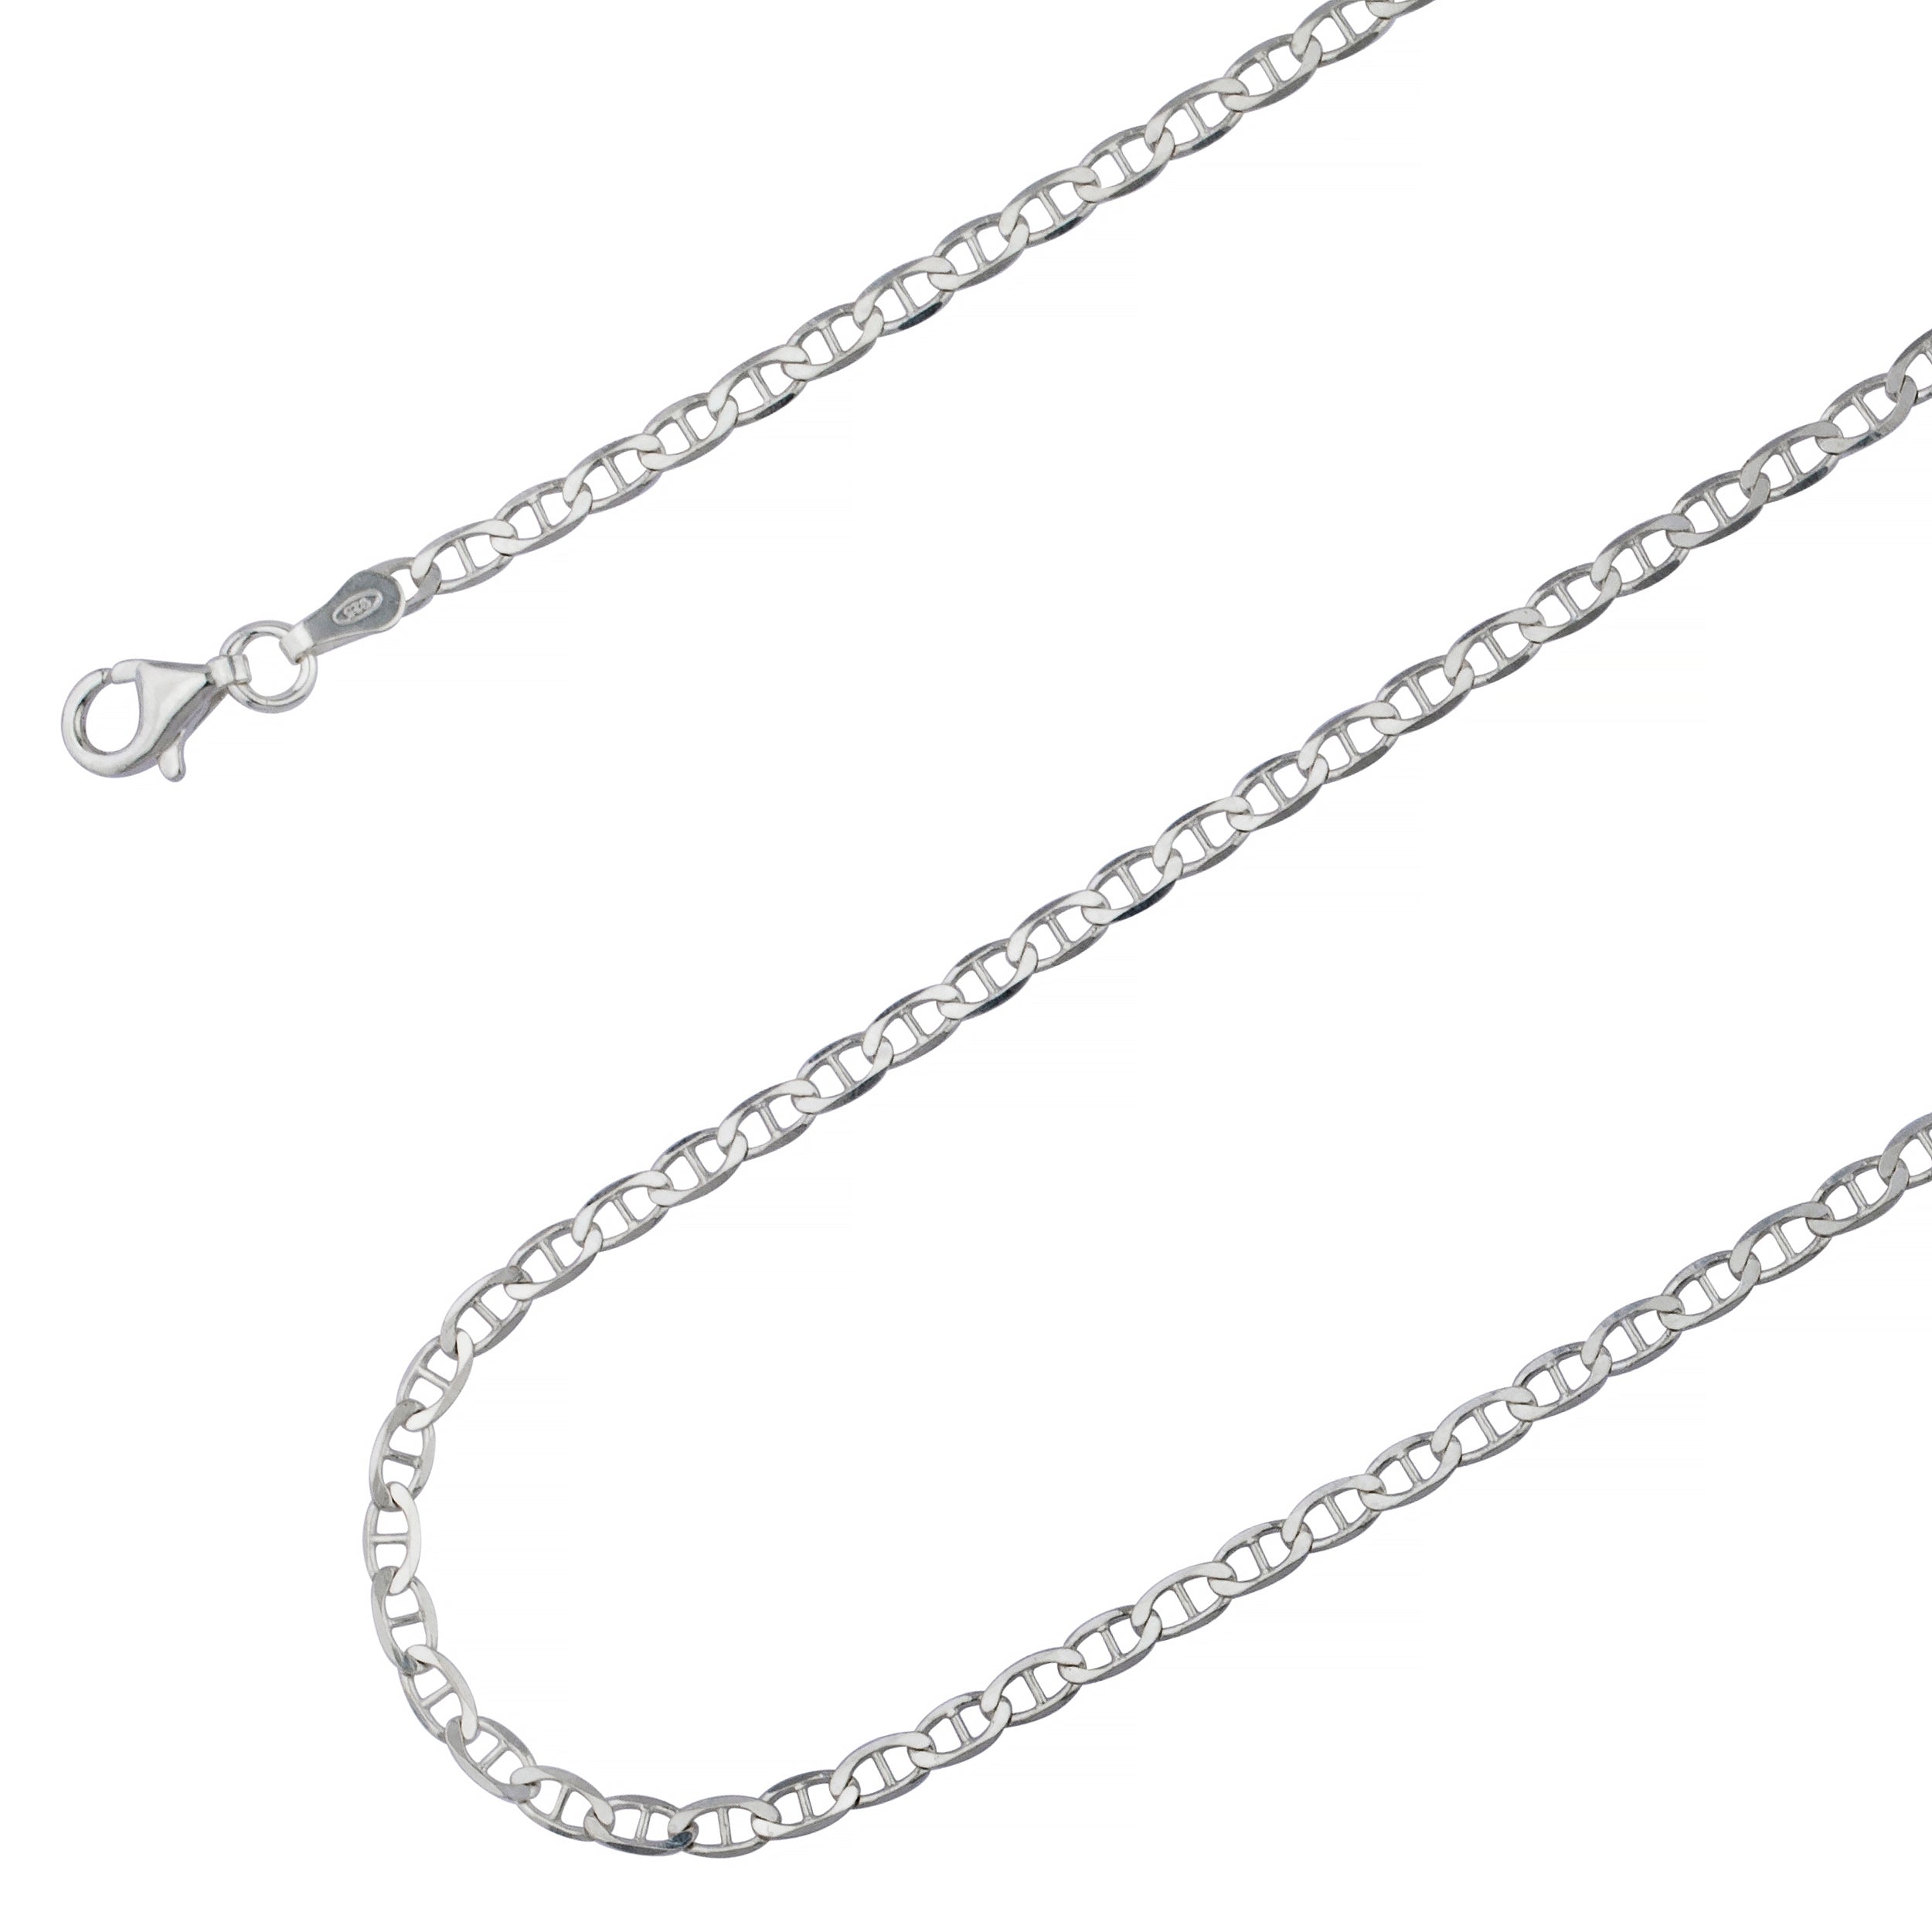 STERLING SILVER MARINER/GUCCI NECKLACE, 24 INCHES 4MM THICK